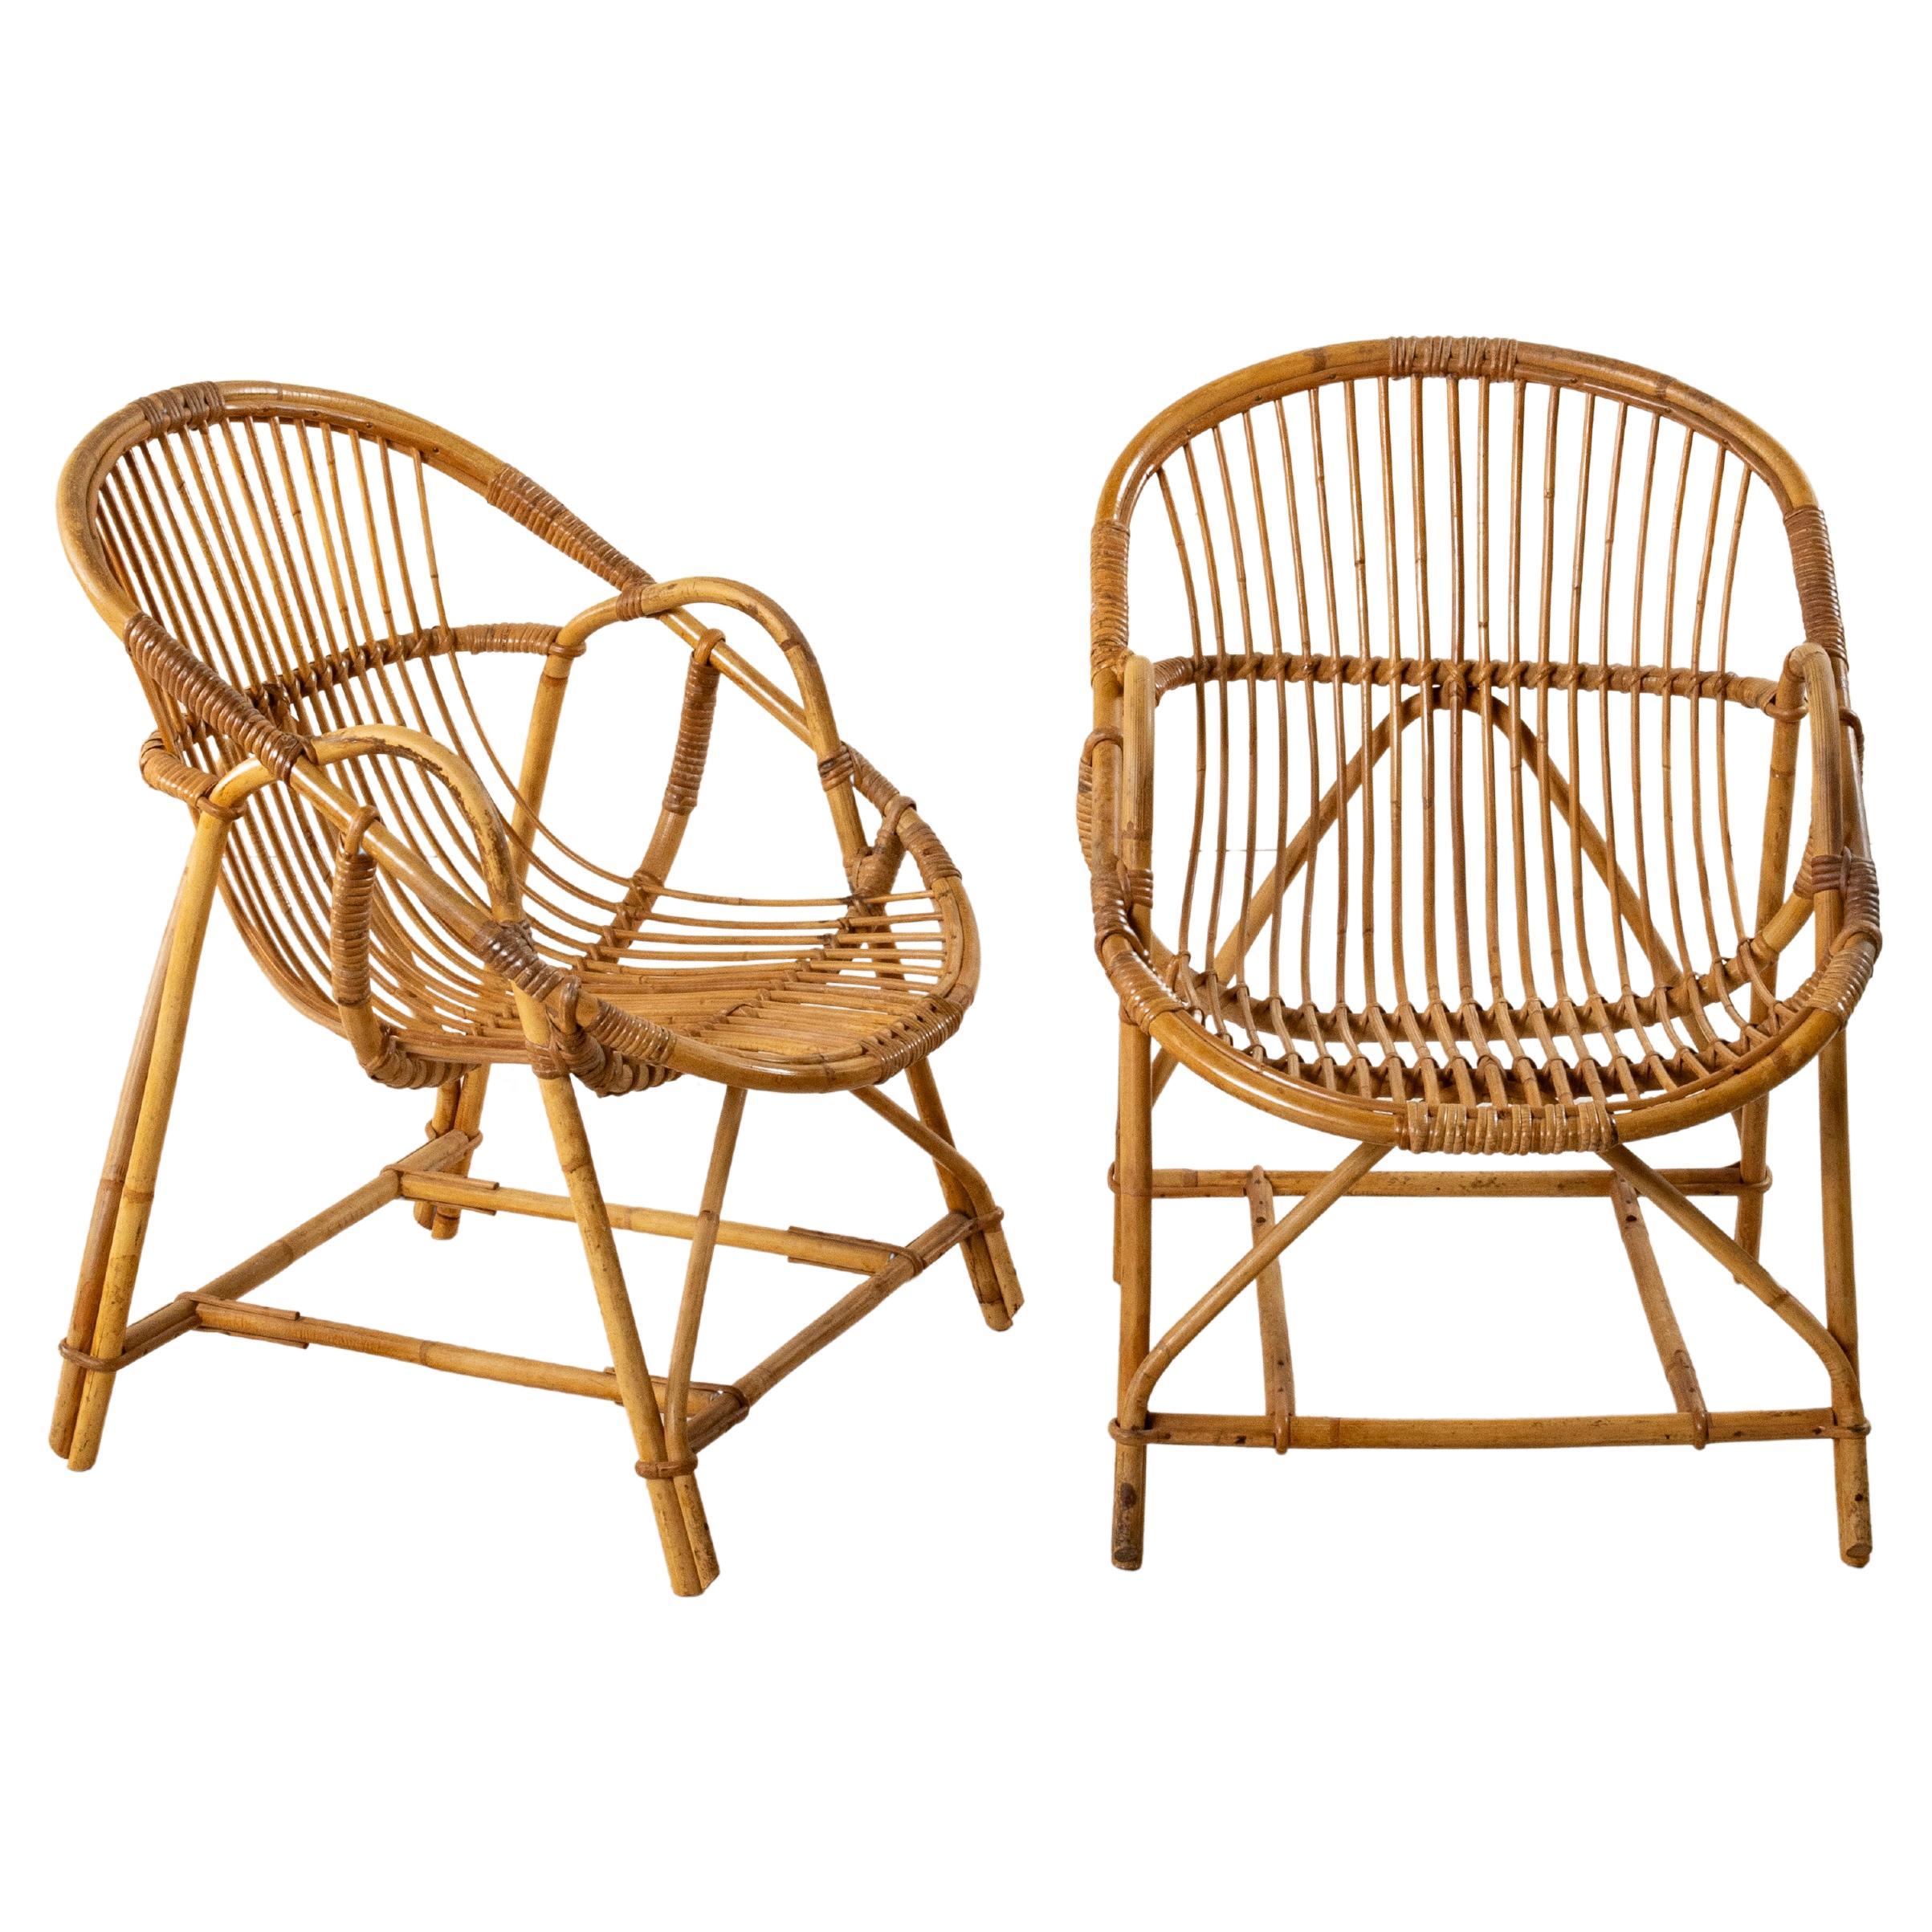 Pair of Mid-20th Century French Rattan Armchairs or Garden Chairs For Sale